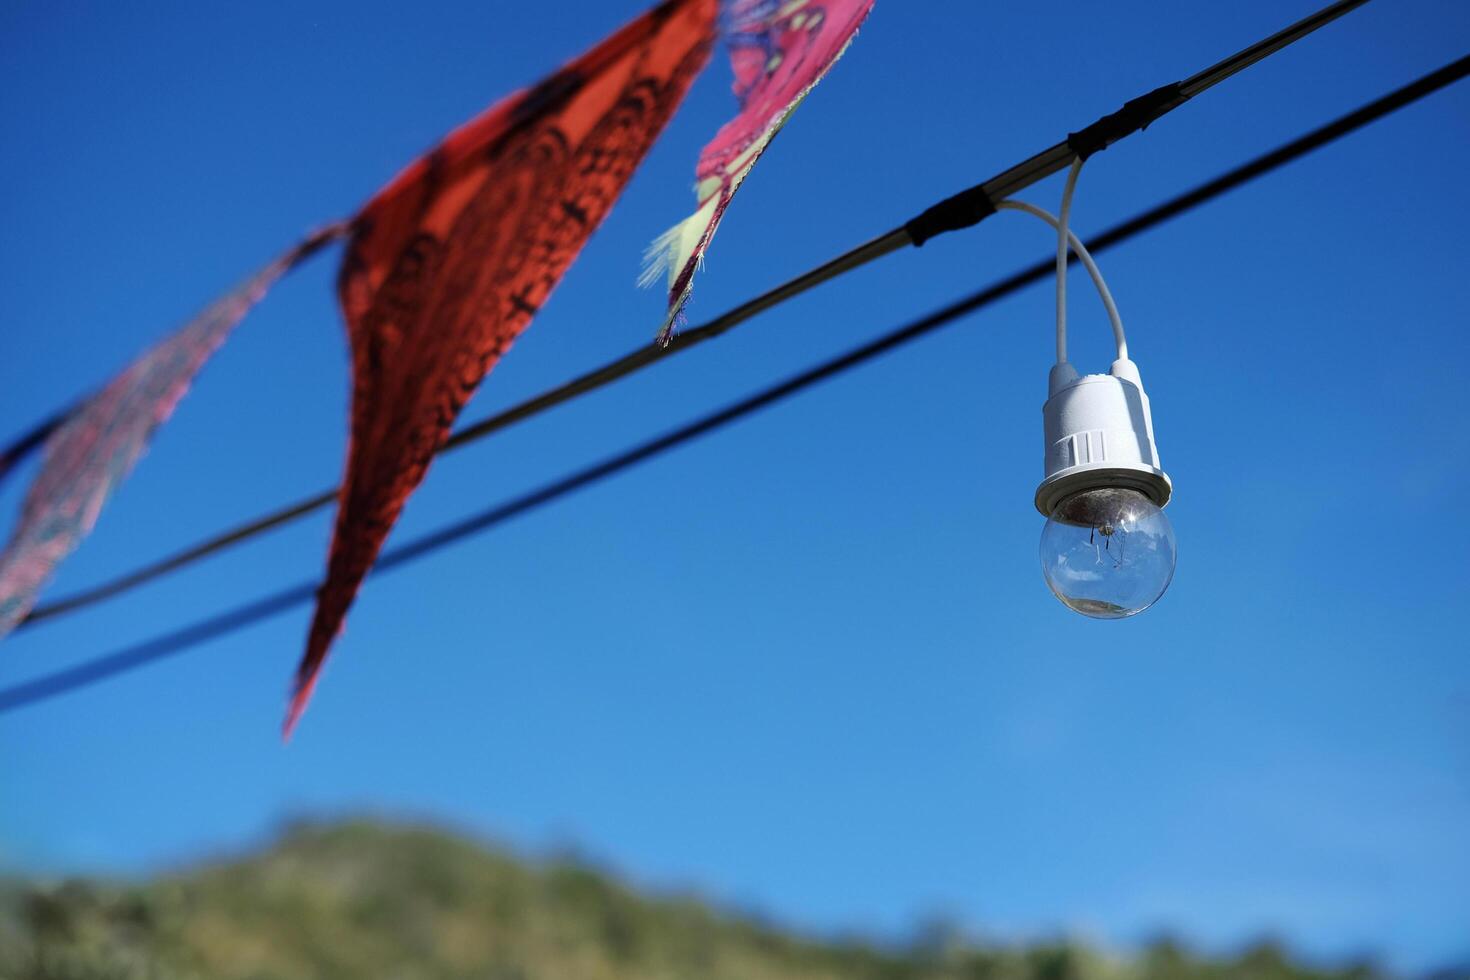 Equipped and electrical with light bulbs is hanging in the wind and sunlight on blue sky photo